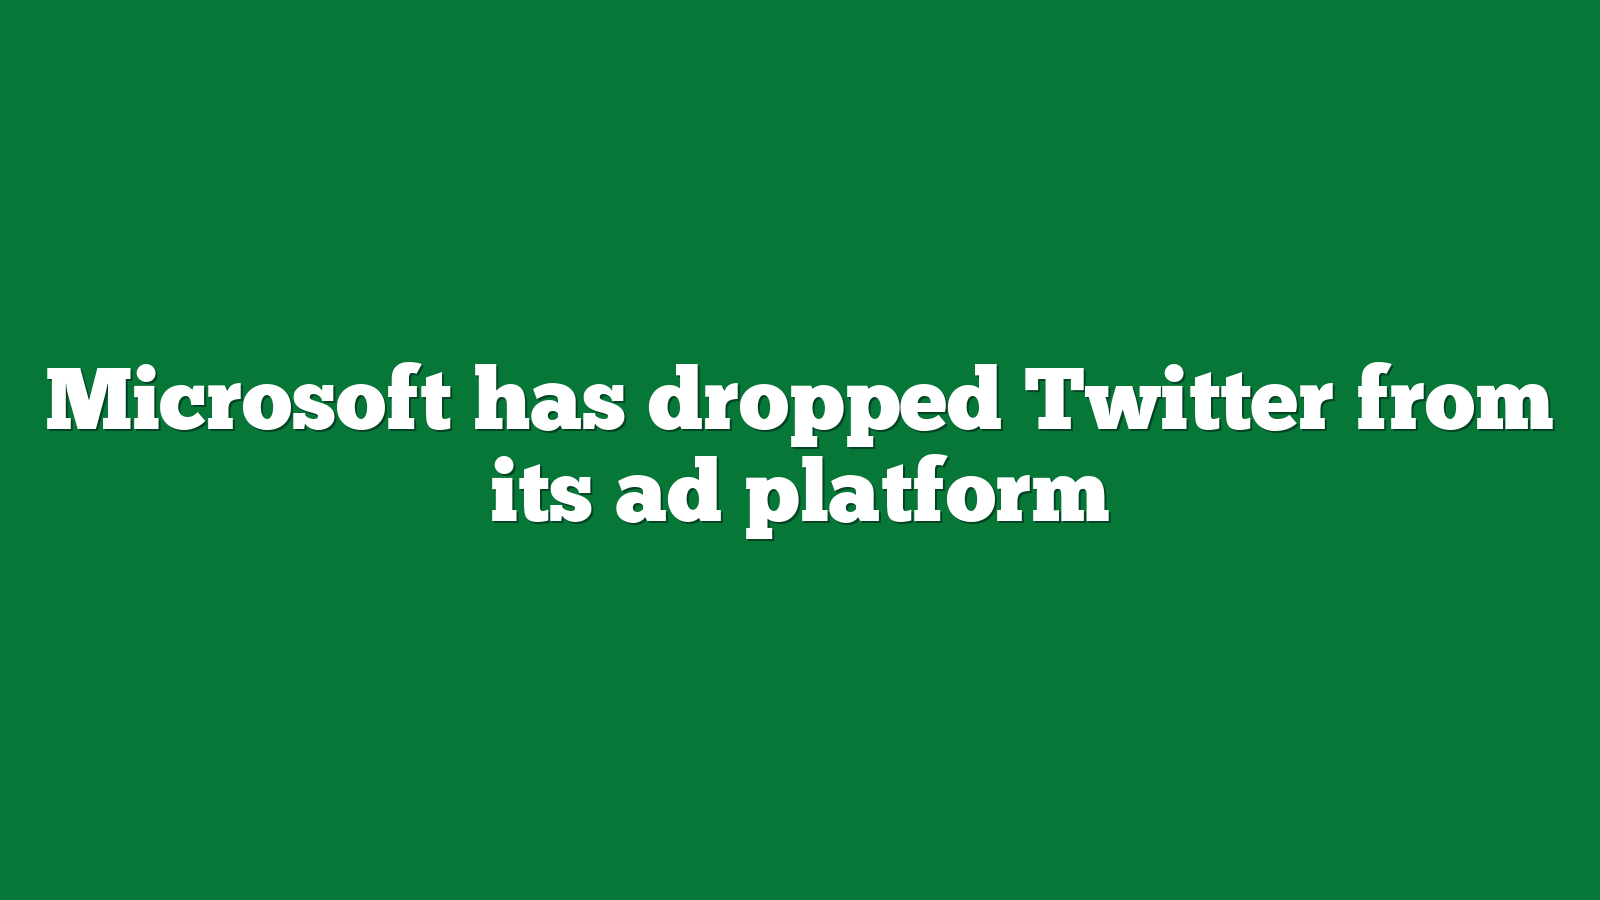 Microsoft has dropped Twitter from its ad platform